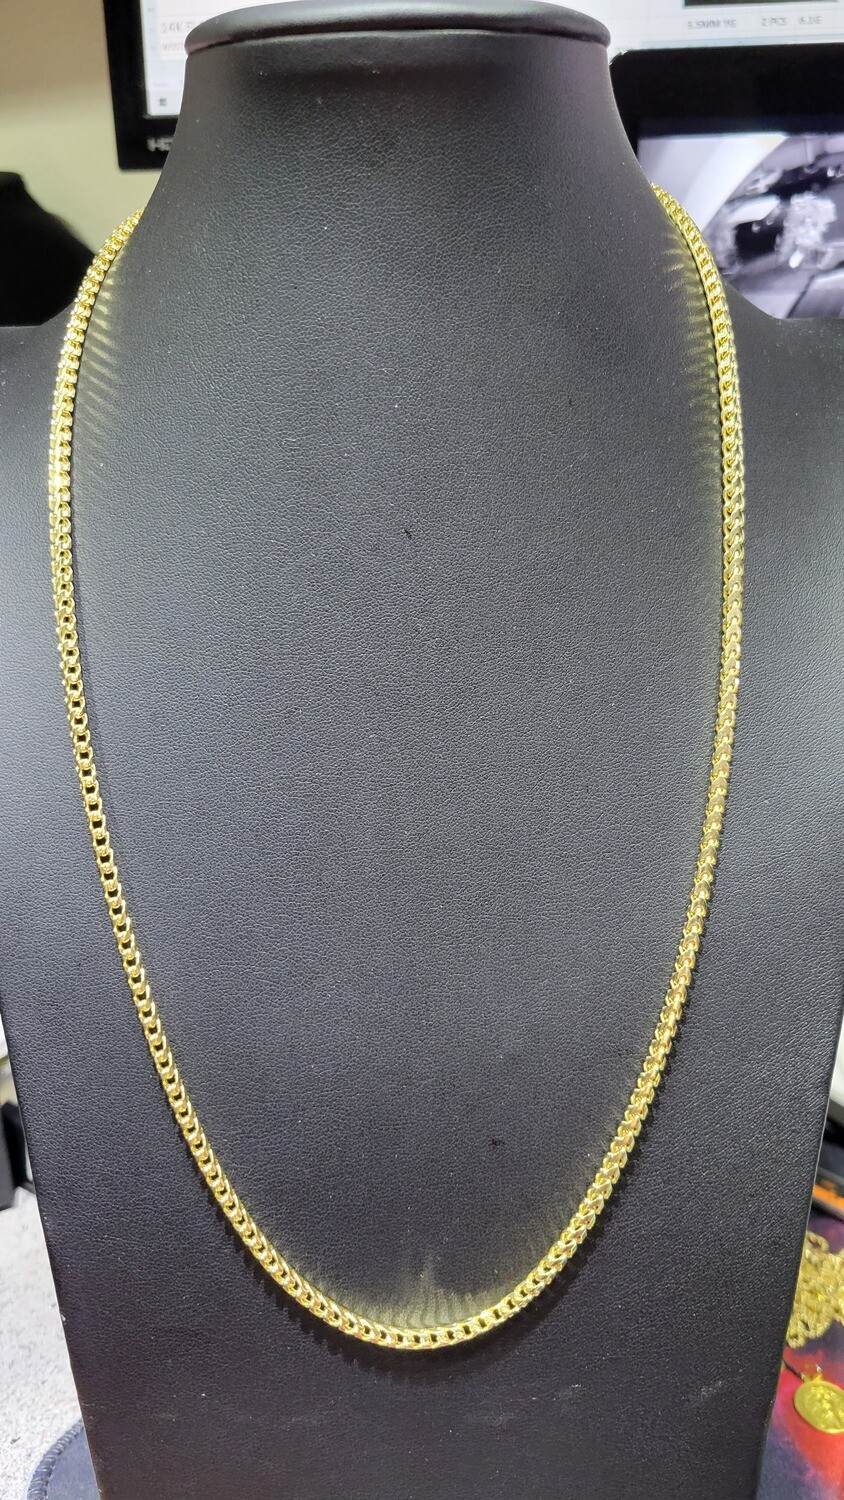 14K 3MM PLAIN FRANCO CHAIN, PREORDERS TAKE UP TO 1 WEEK TO SHIP OUT: 14K 3MM 20&quot; PLAIN FRANCO APPROX. 25.9 GRAMS